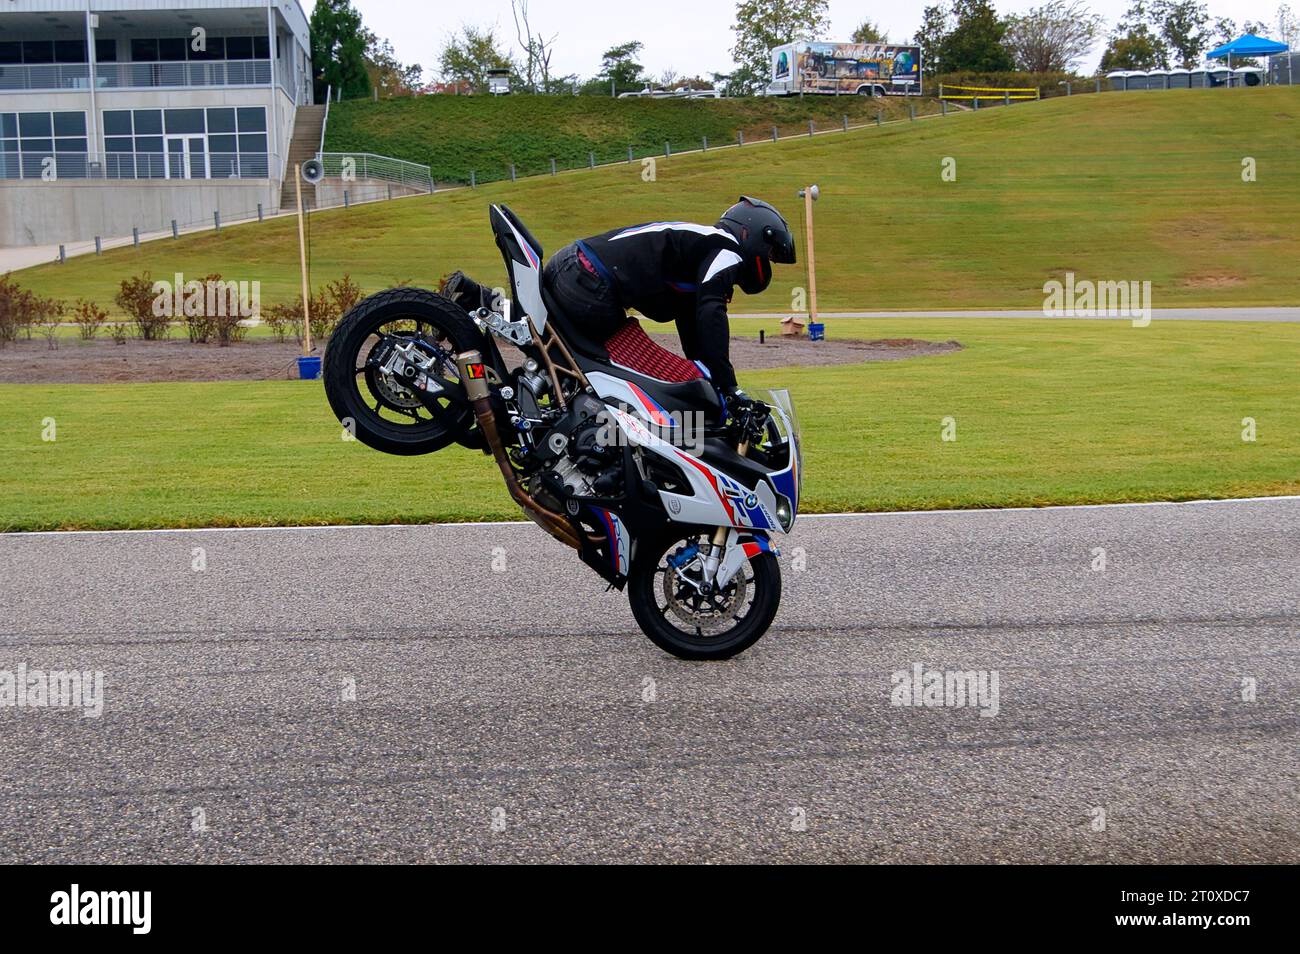 Stunt riding was an attraction at the Vintage Festival at Barber Motorsports in Alabama. Stock Photo